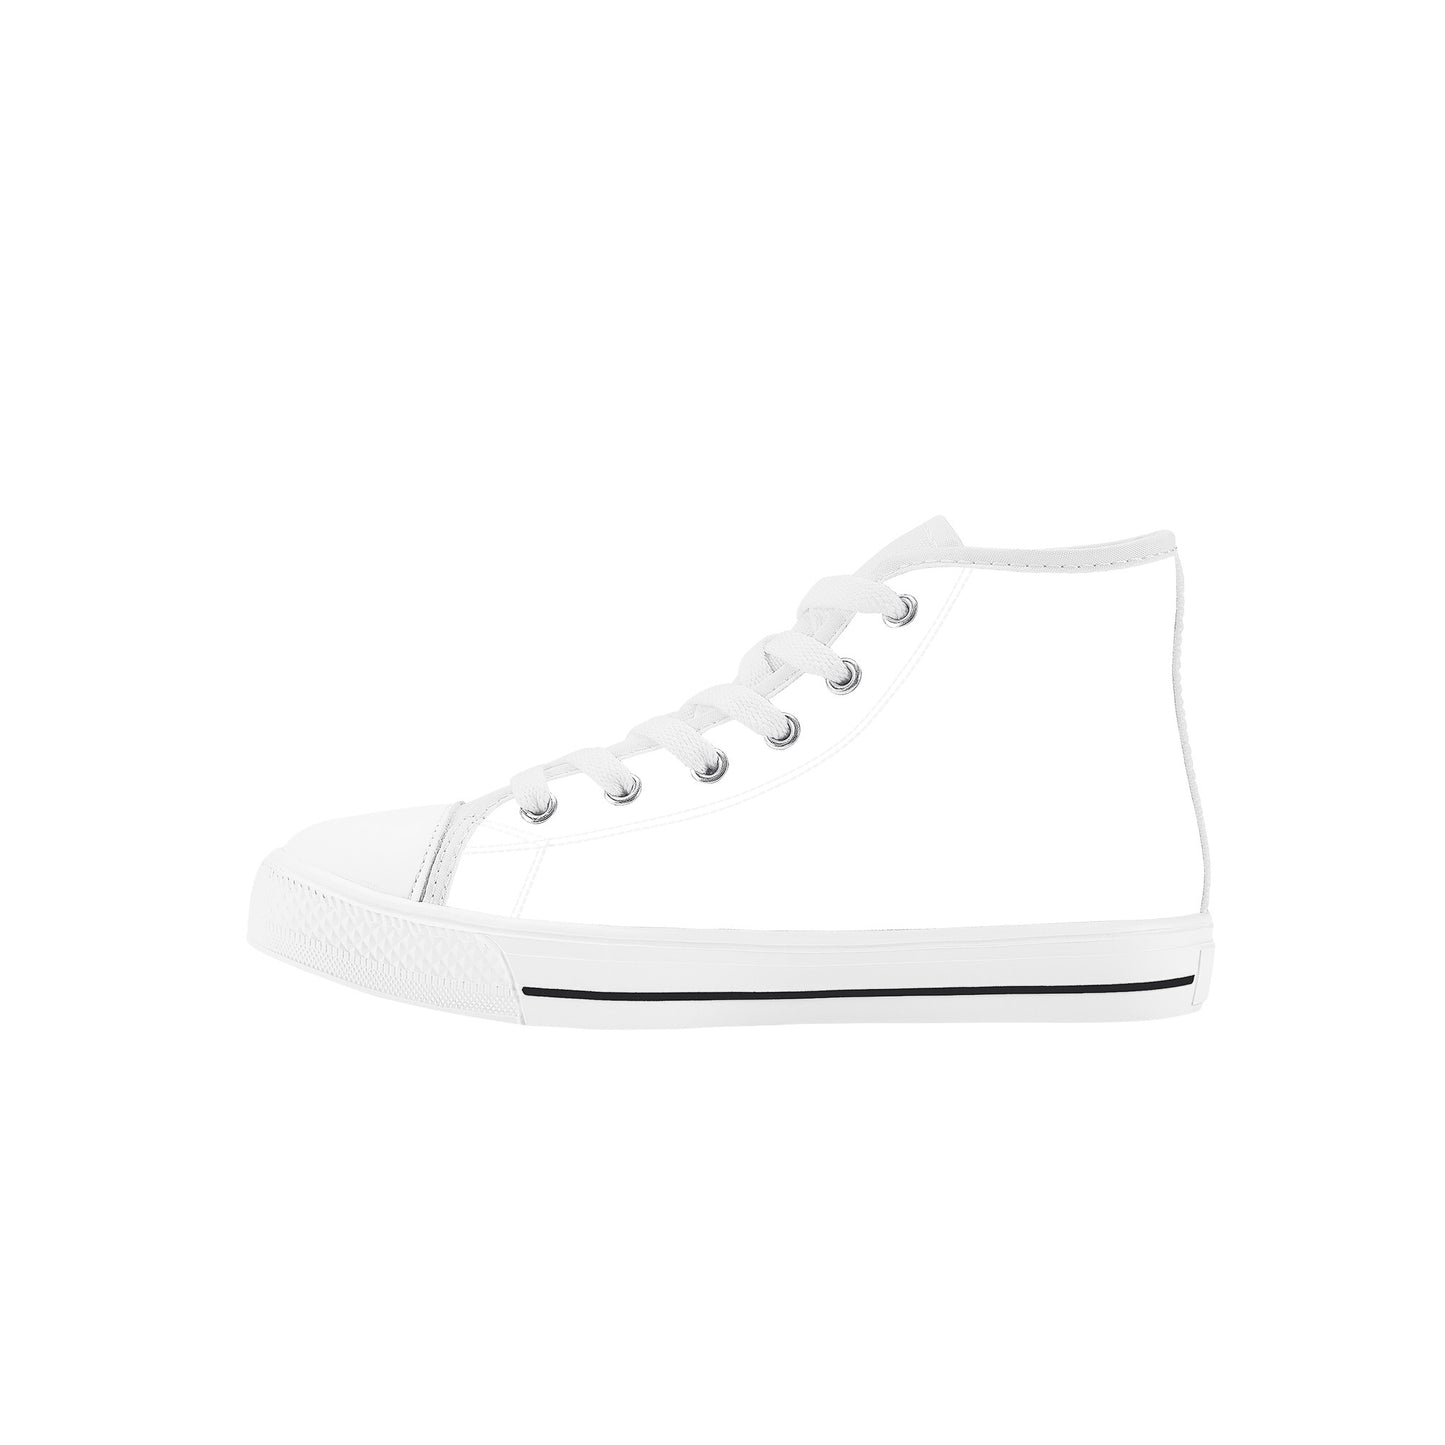 Create You Own Kids High Top Canvas Shoes